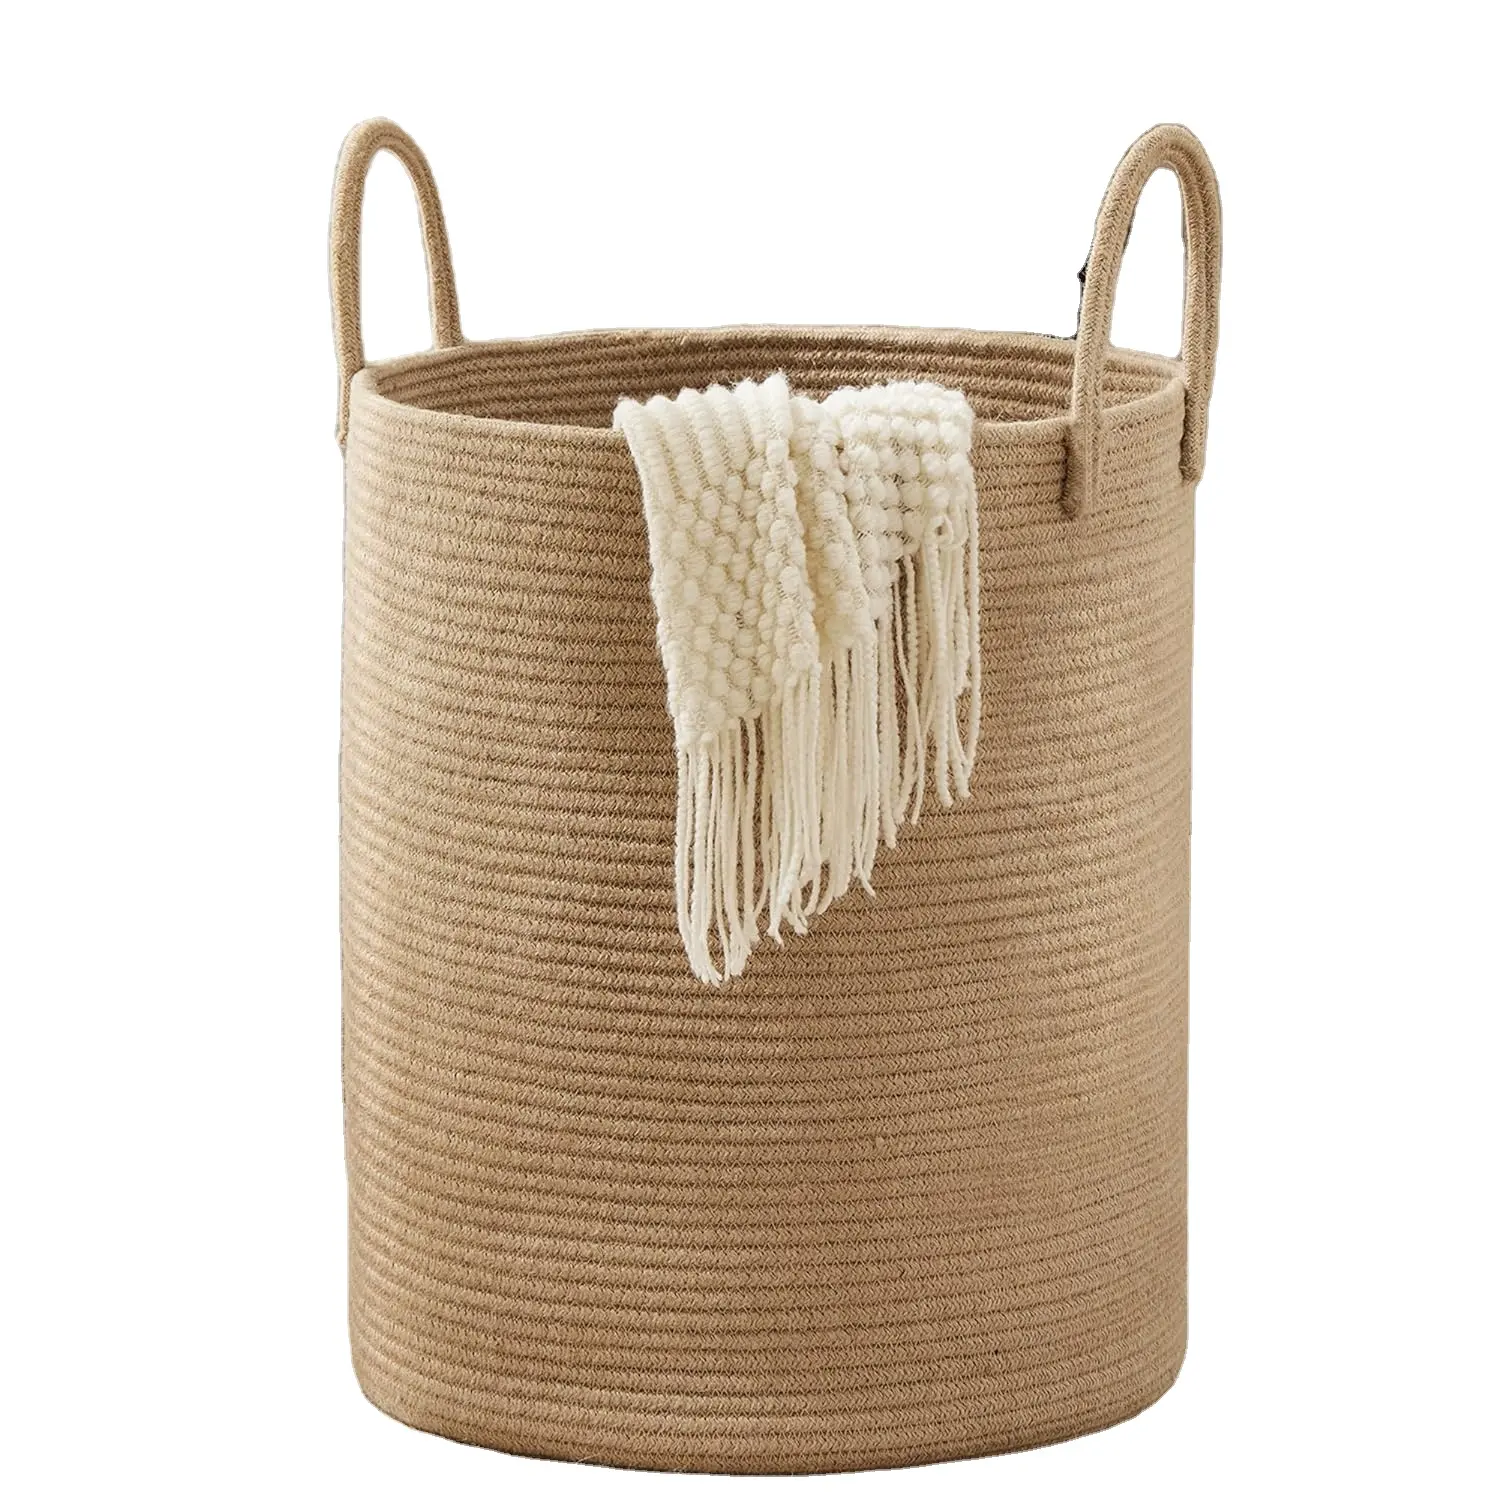 Wholesale Buy Woven laundry Storage baskets Decorated cotton rope baskets for blankets, toys, clothing disposal